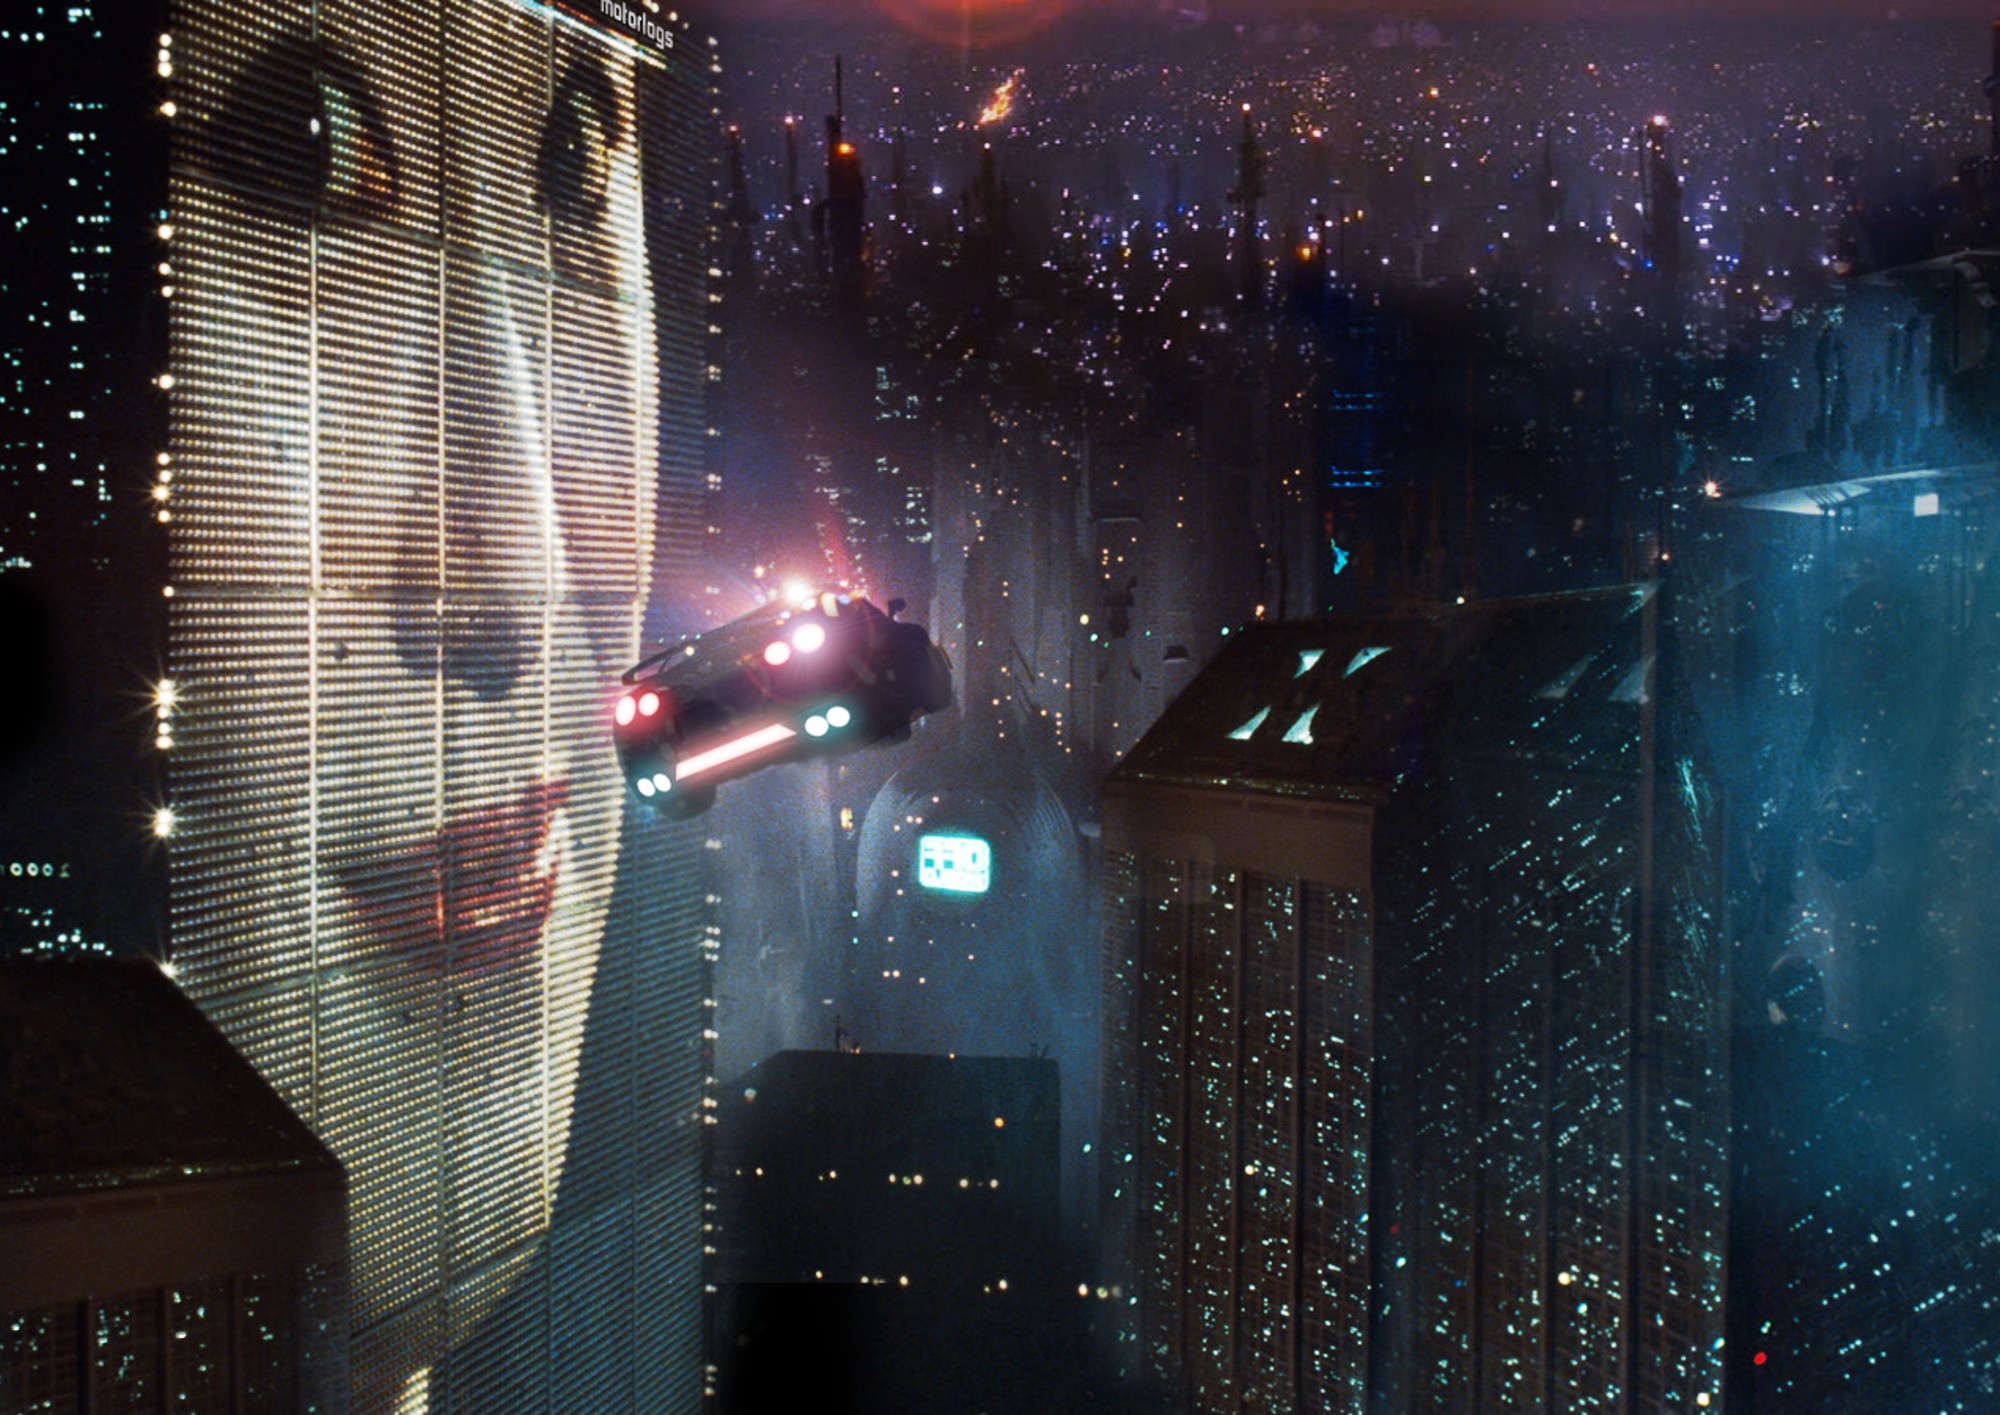 Image from the motion picture Blade Runner